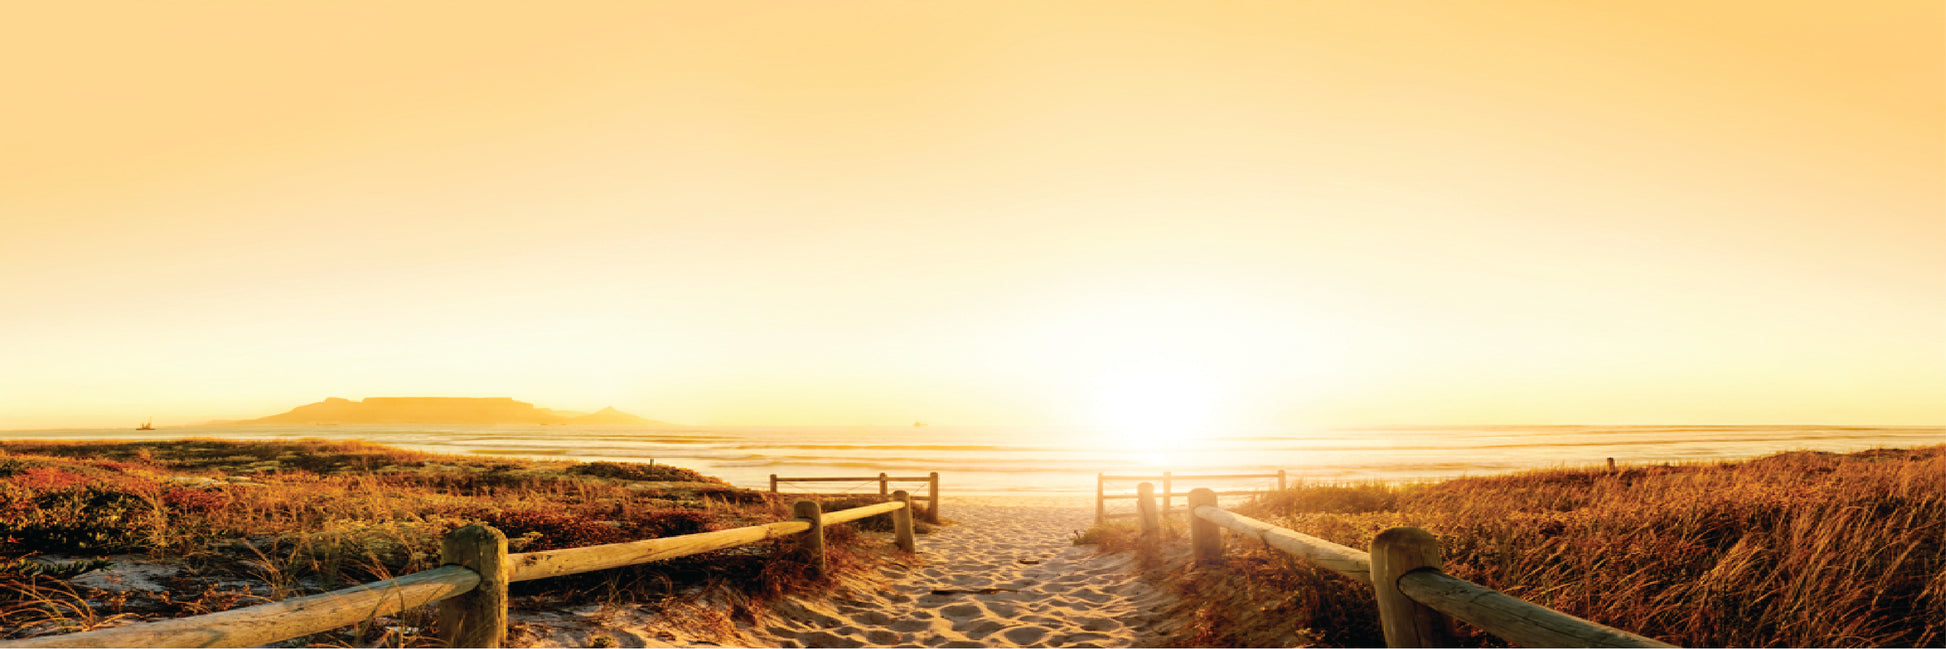 Panoramic Canvas Beach Sunset High Quality 100% Australian made wall Canvas Print ready to hang